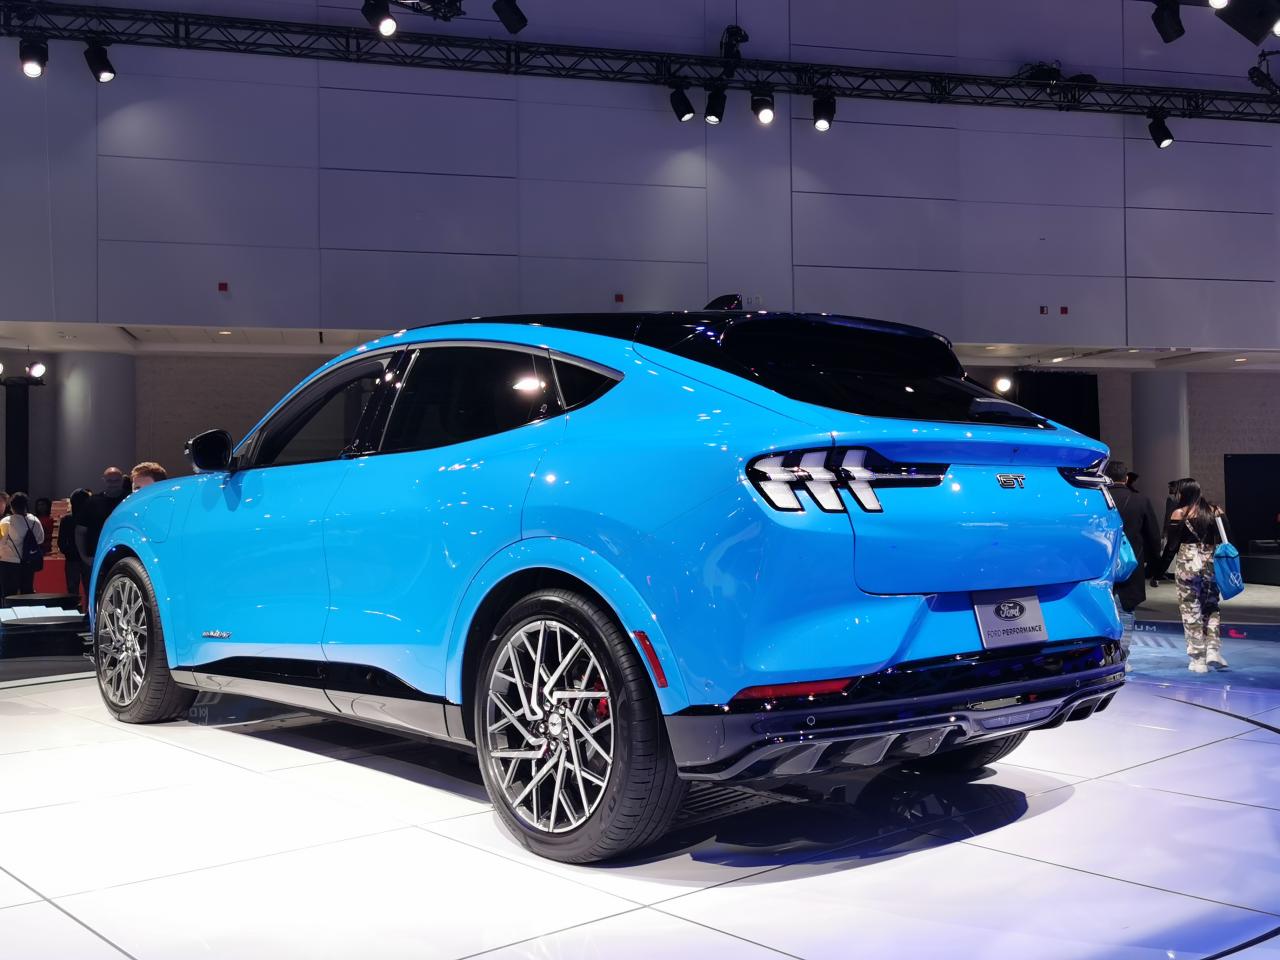 Ford Mustang Mach E All Electric SUV 2020 Canadian International